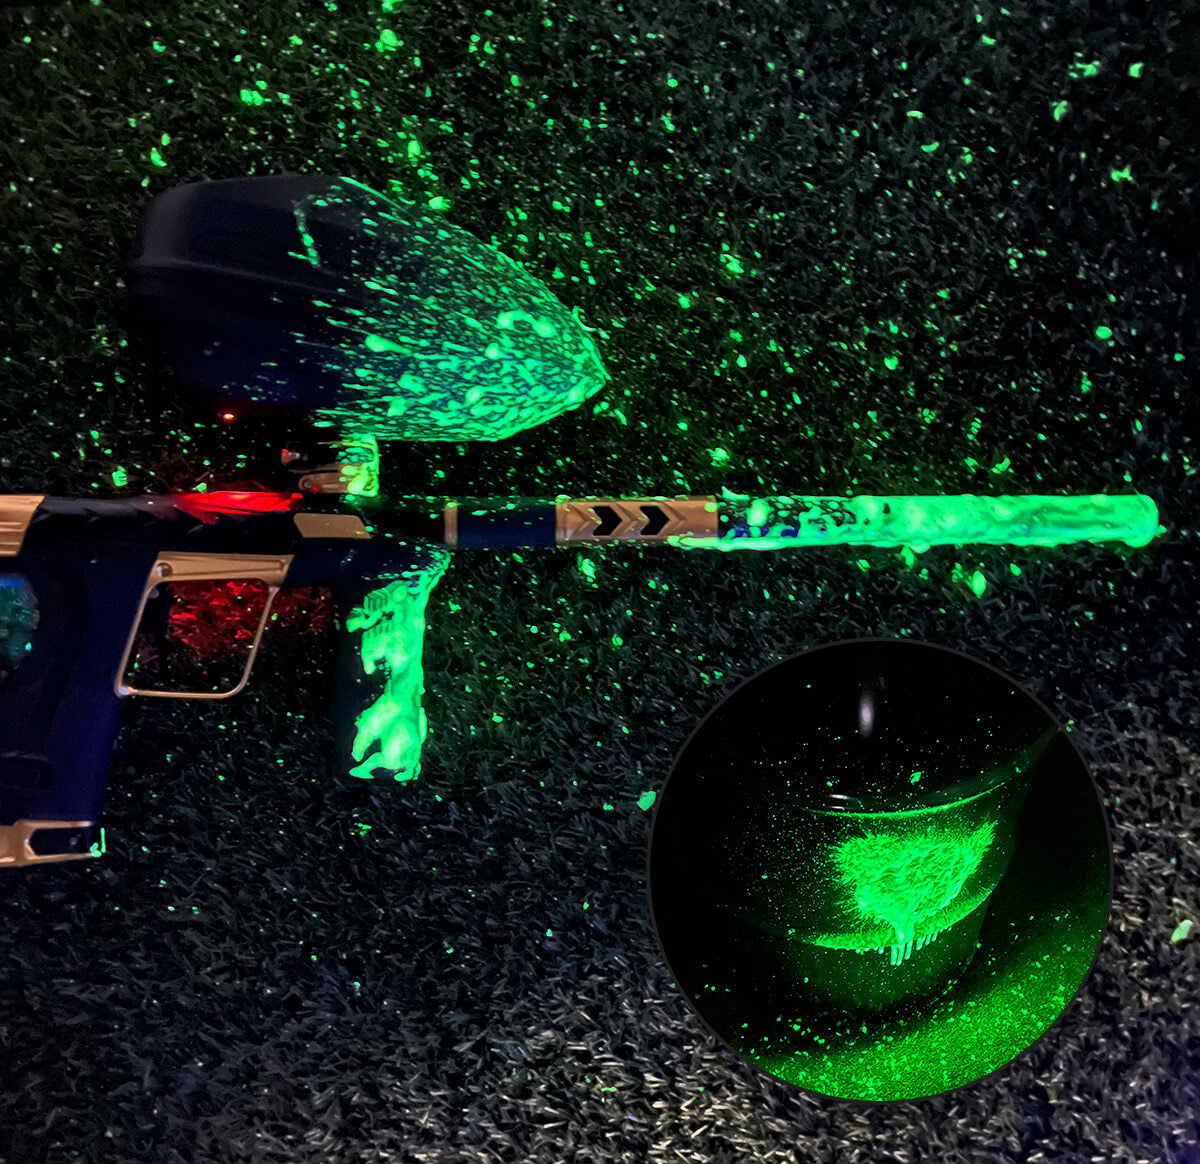 HK ARMY GLOW-IN-THE-DARK PAINTBALLS - 200 ROUNDS - Eminent Paintball And Airsoft